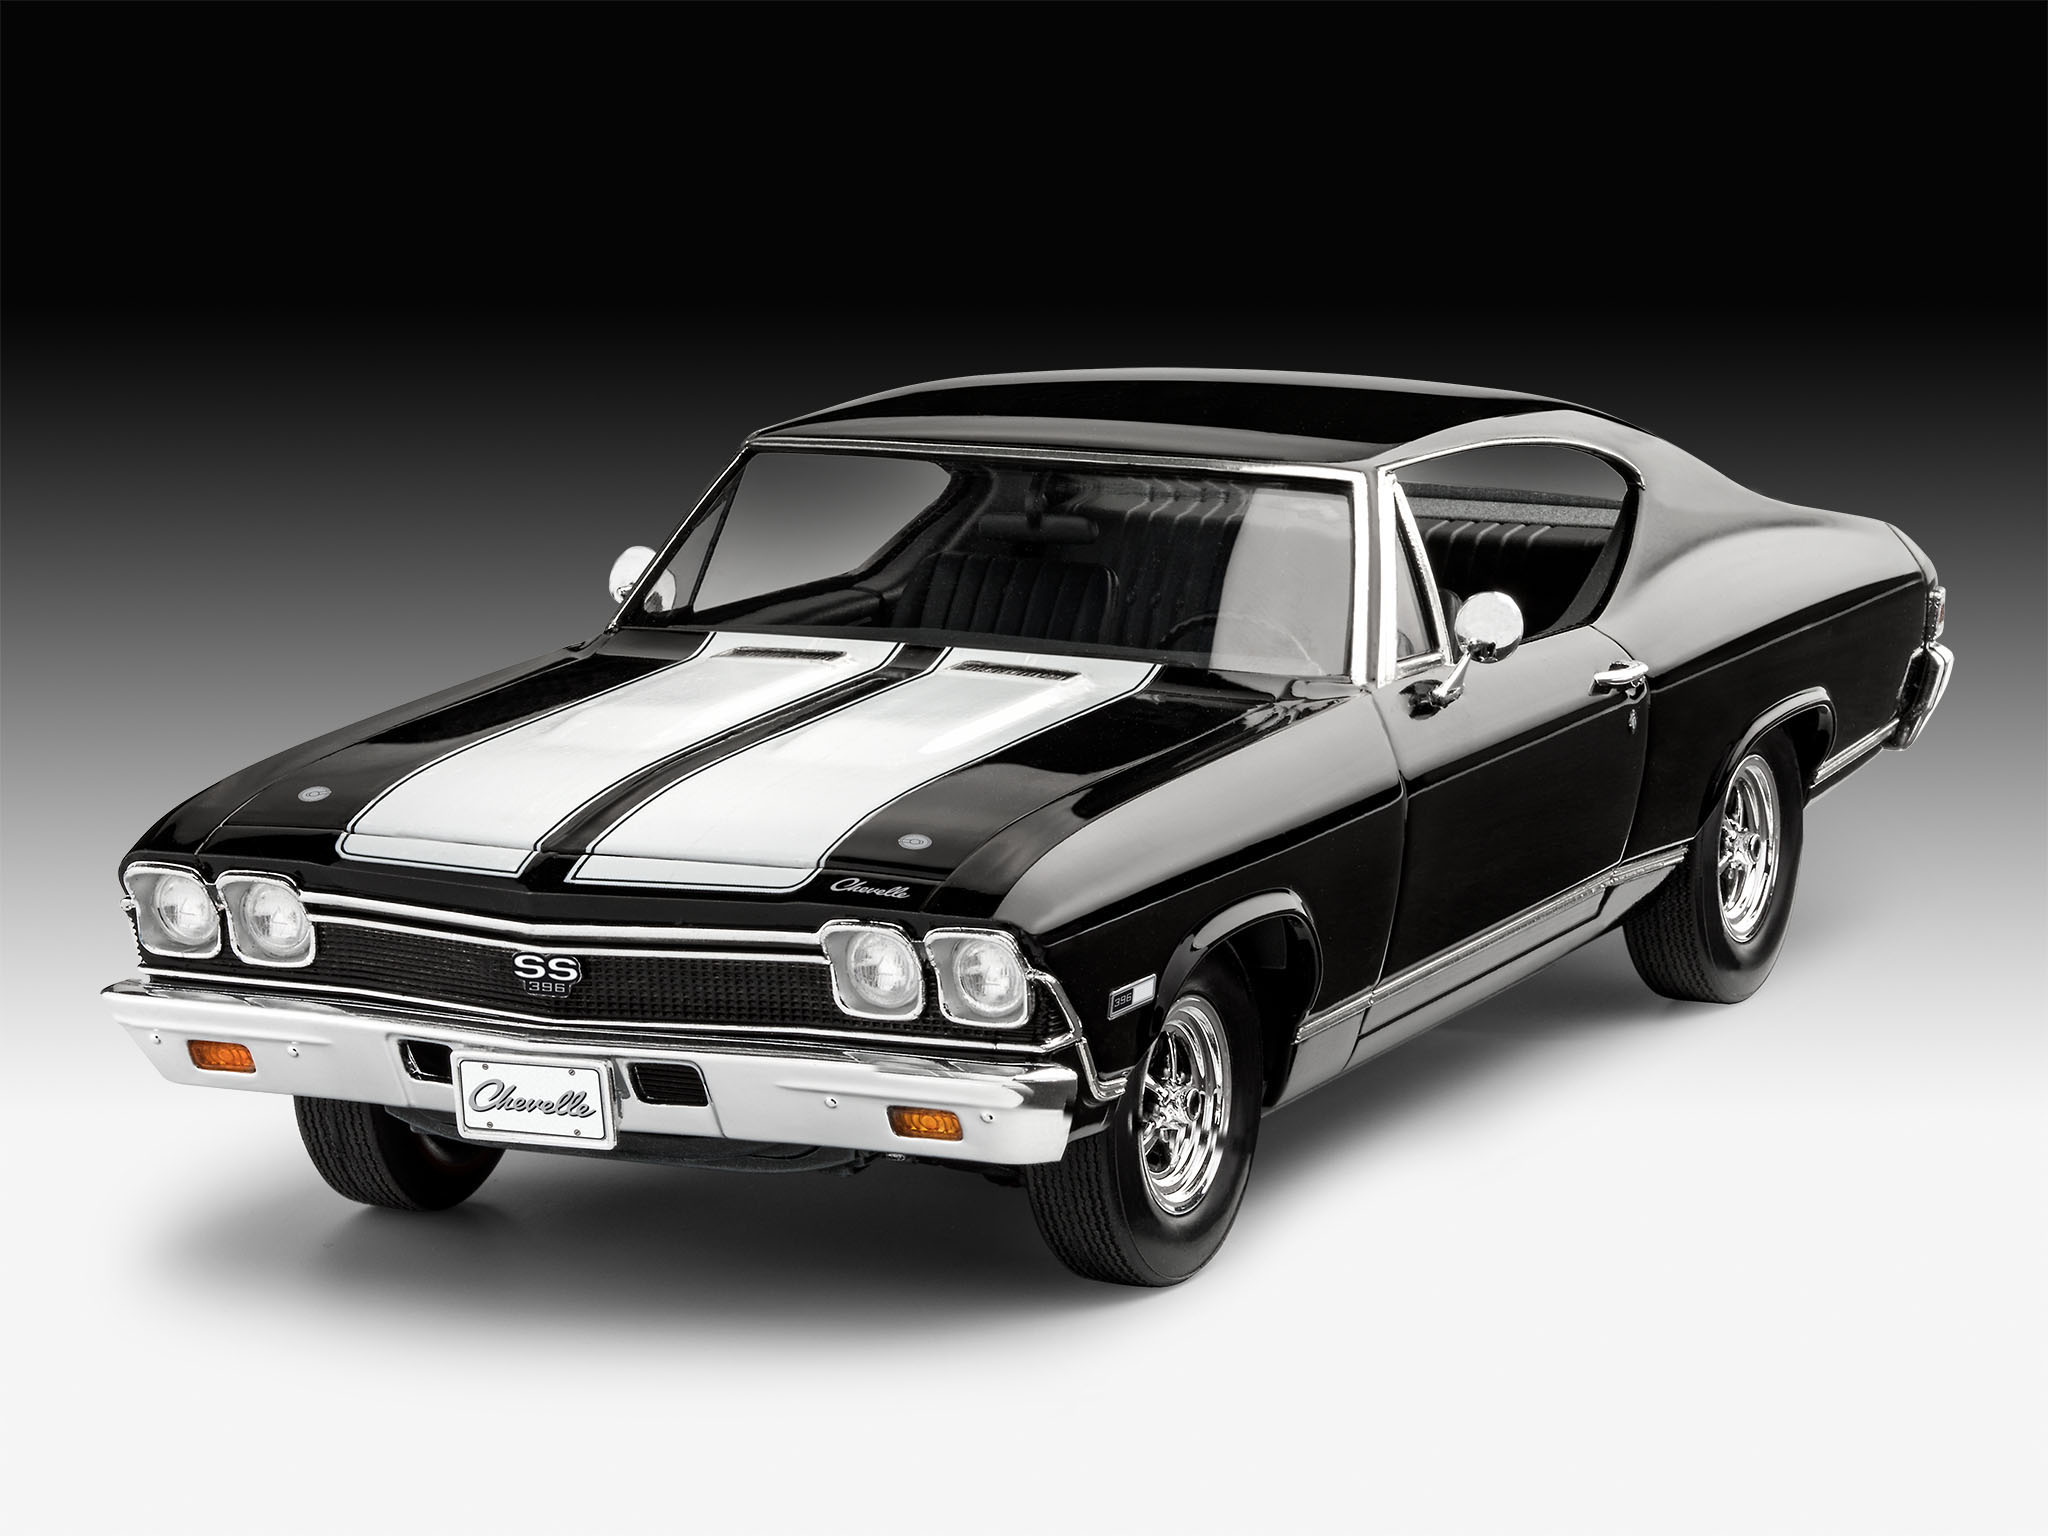 1968 Chevy Chevelle©SS 396 - 07662